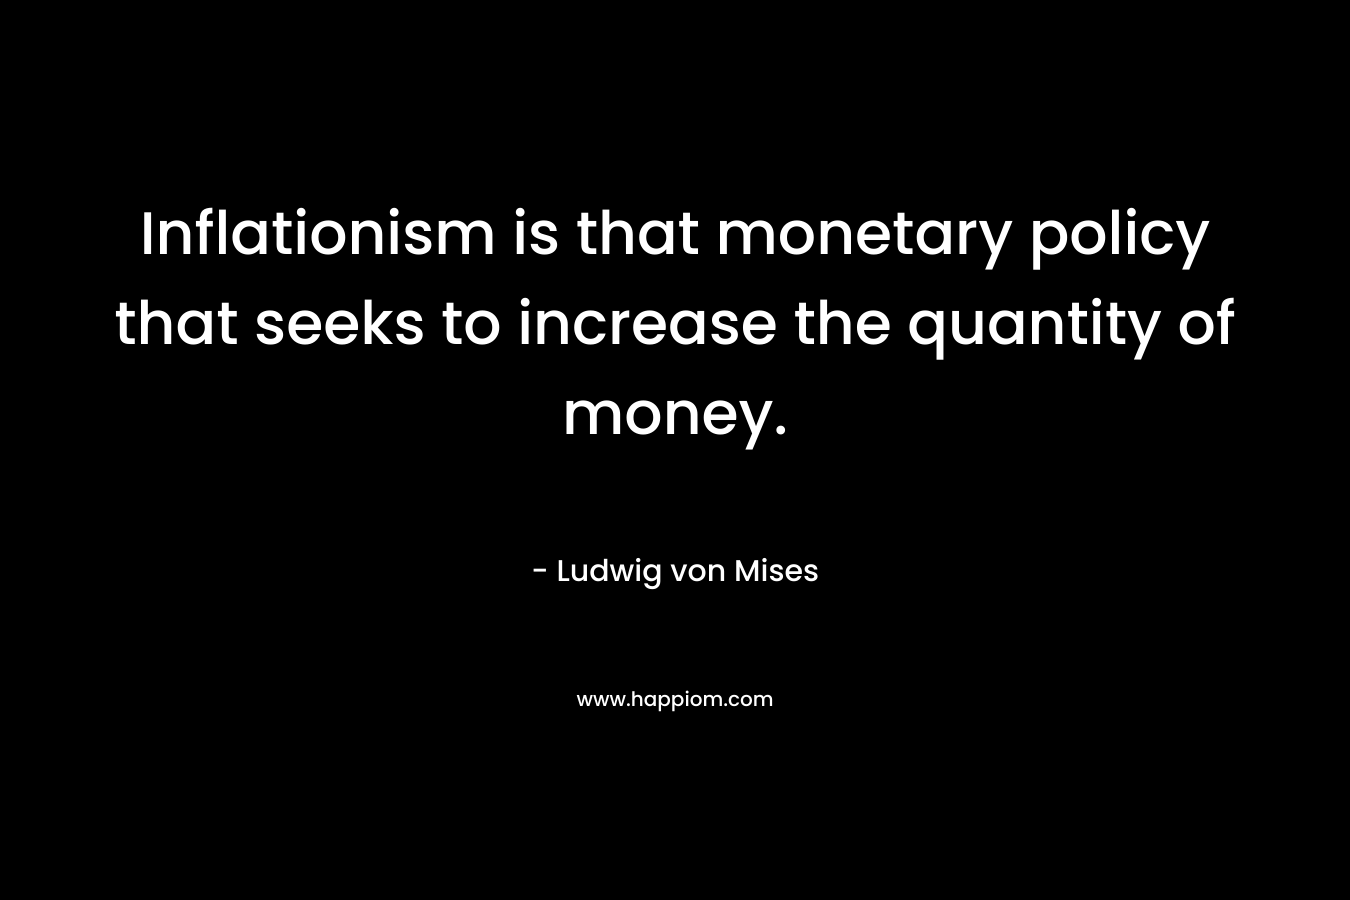 Inflationism is that monetary policy that seeks to increase the quantity of money.